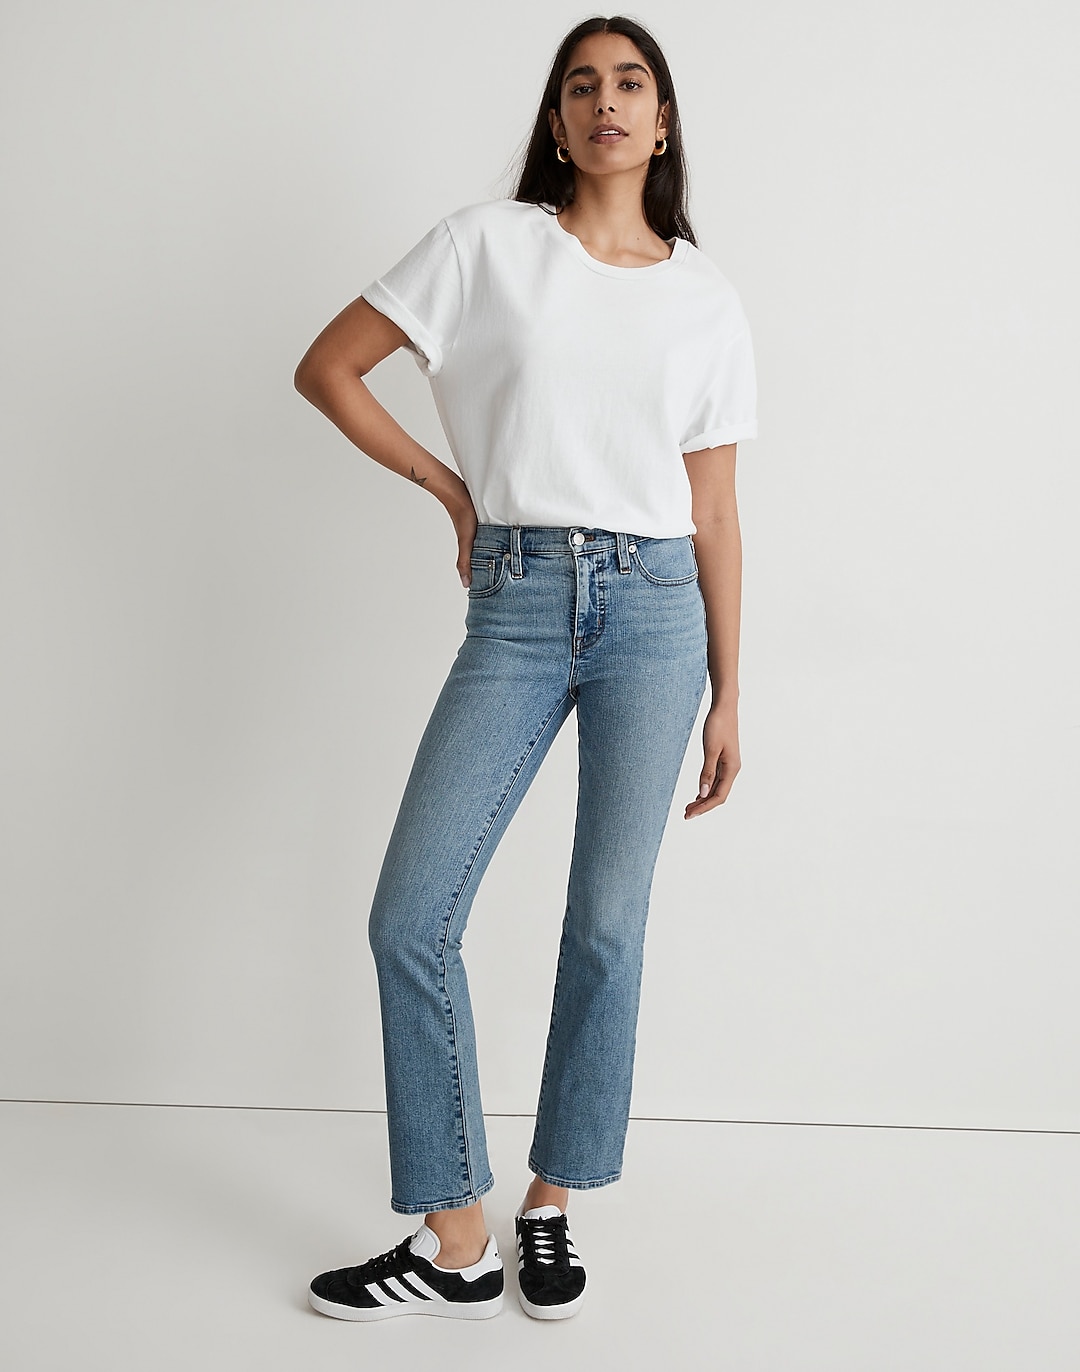 Kick Out Crop Jeans in Milverton Wash | Madewell